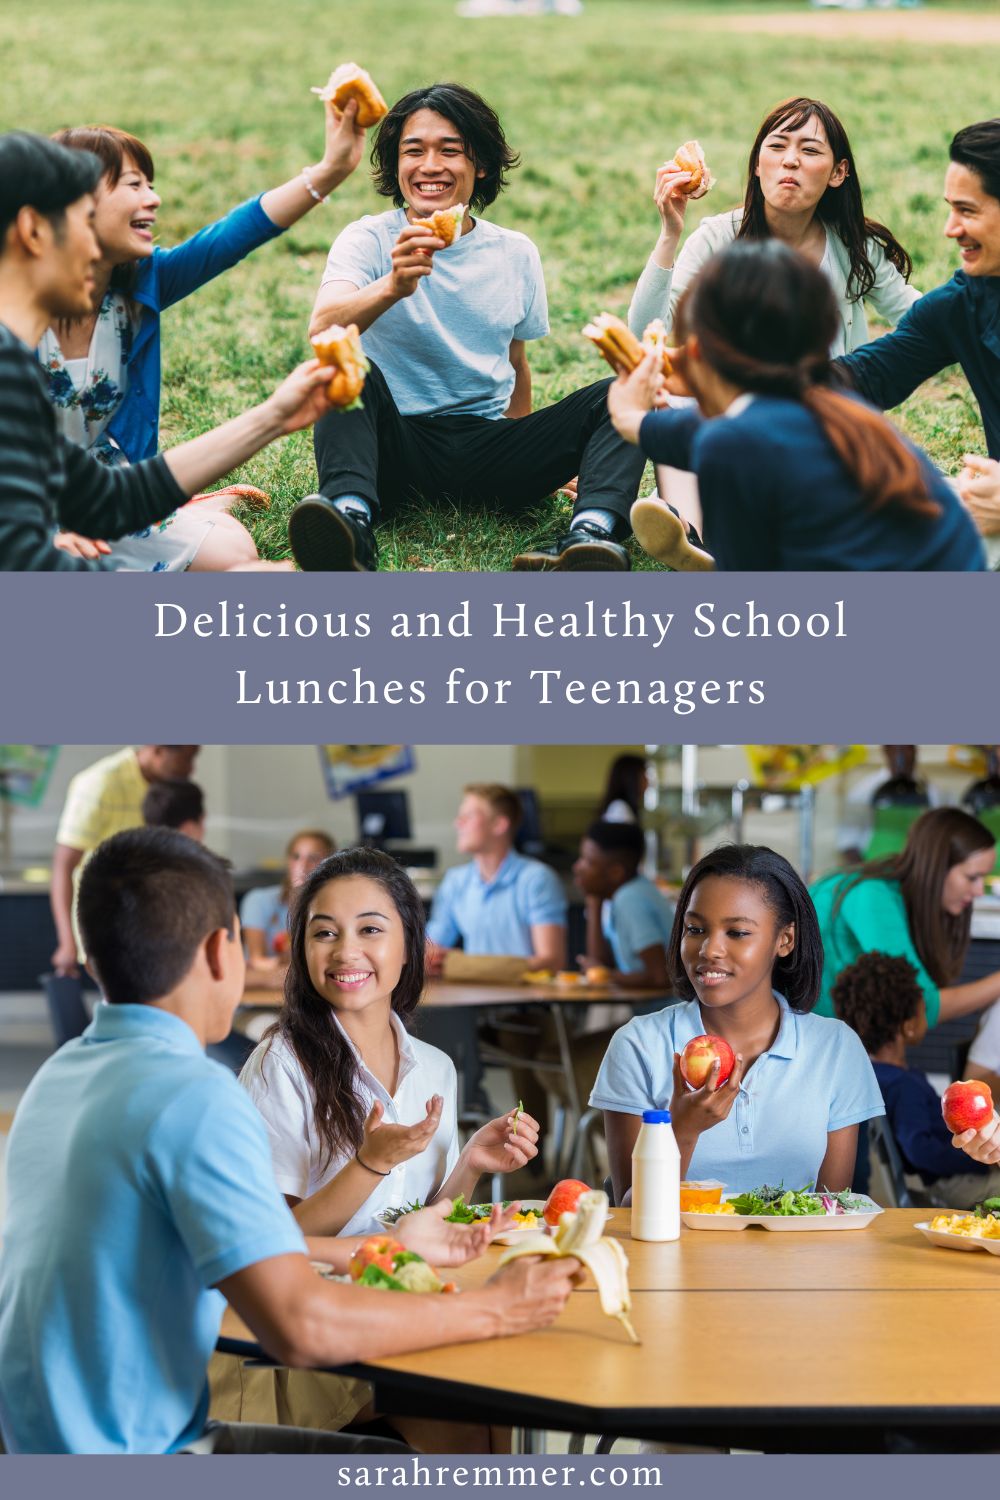 Packing school lunches for teenagers can feel overwhelming! A dietitian mom shares lots of nourishing and tasty school lunch ideas.